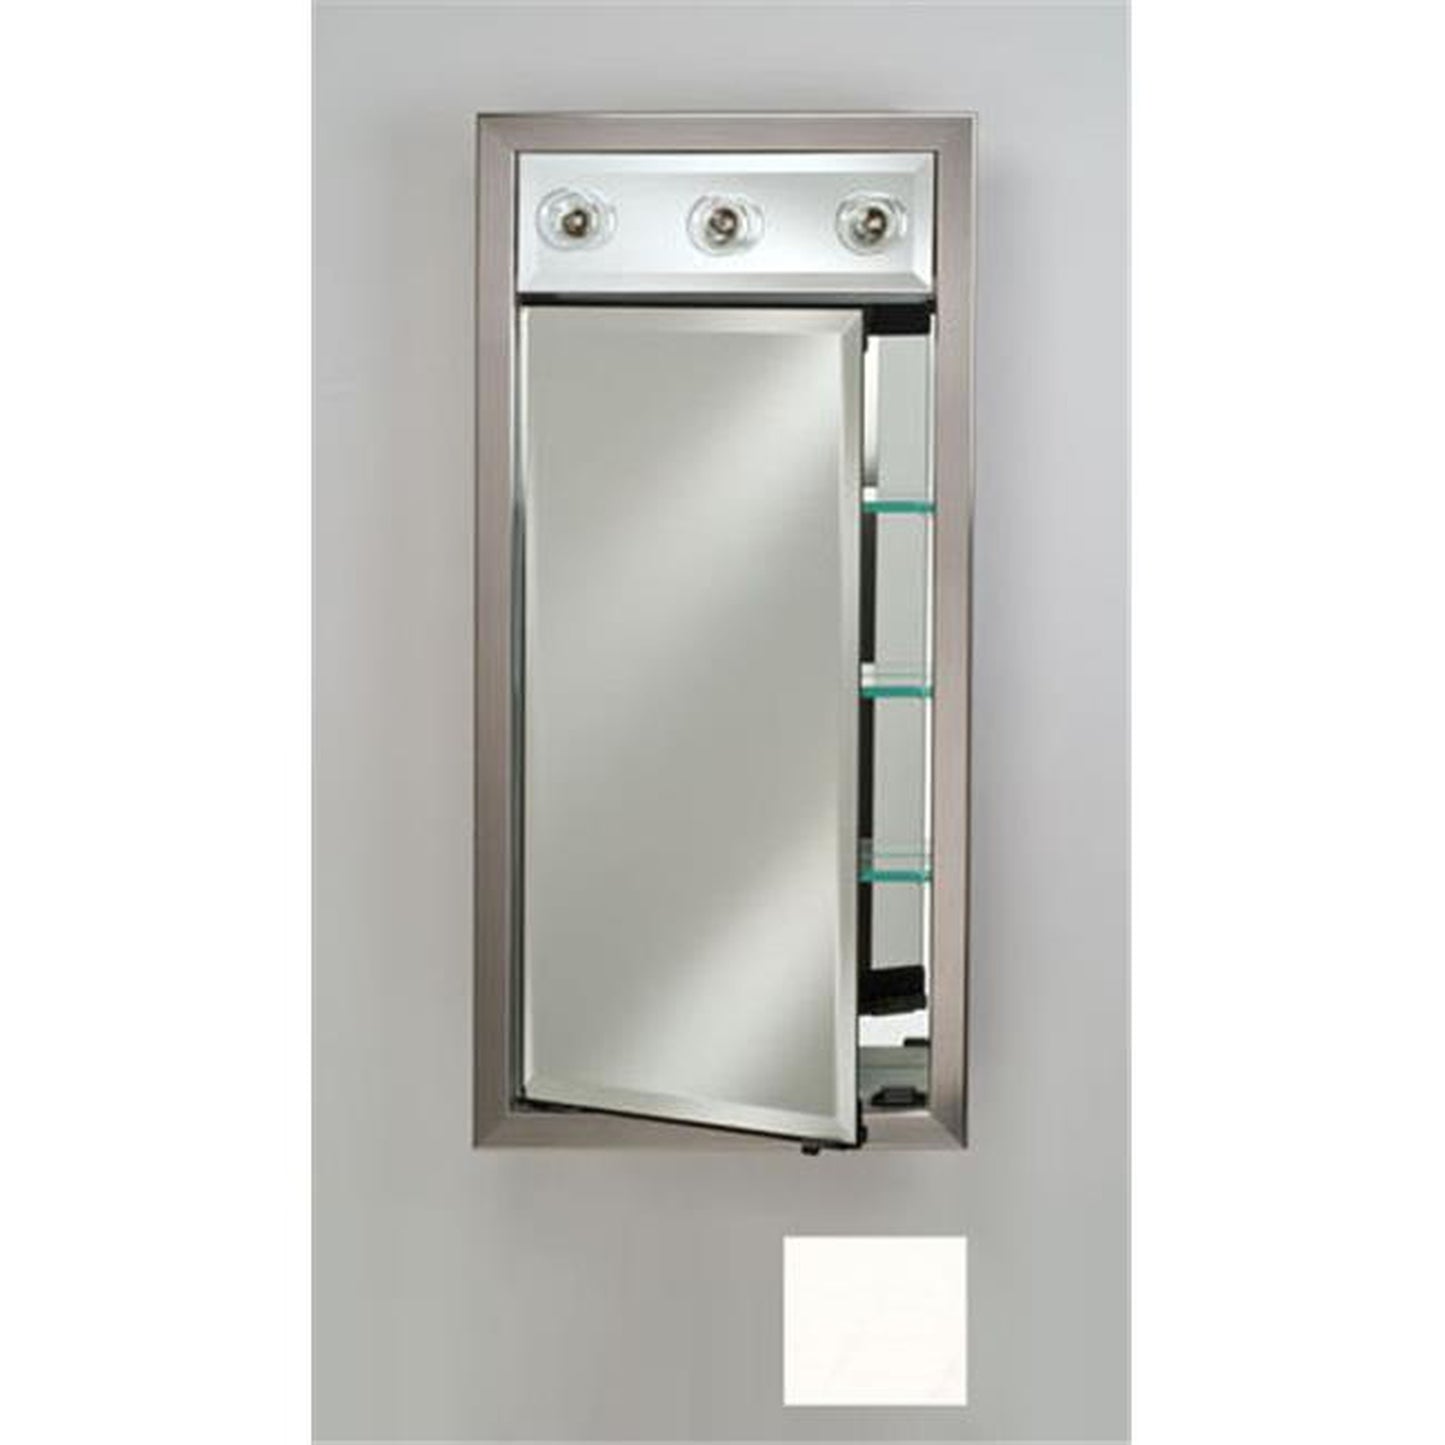 Afina Signature 17" x 34" Arlington White Recessed Left Hinged Single Door Medicine Cabinet With Contemporary Lights